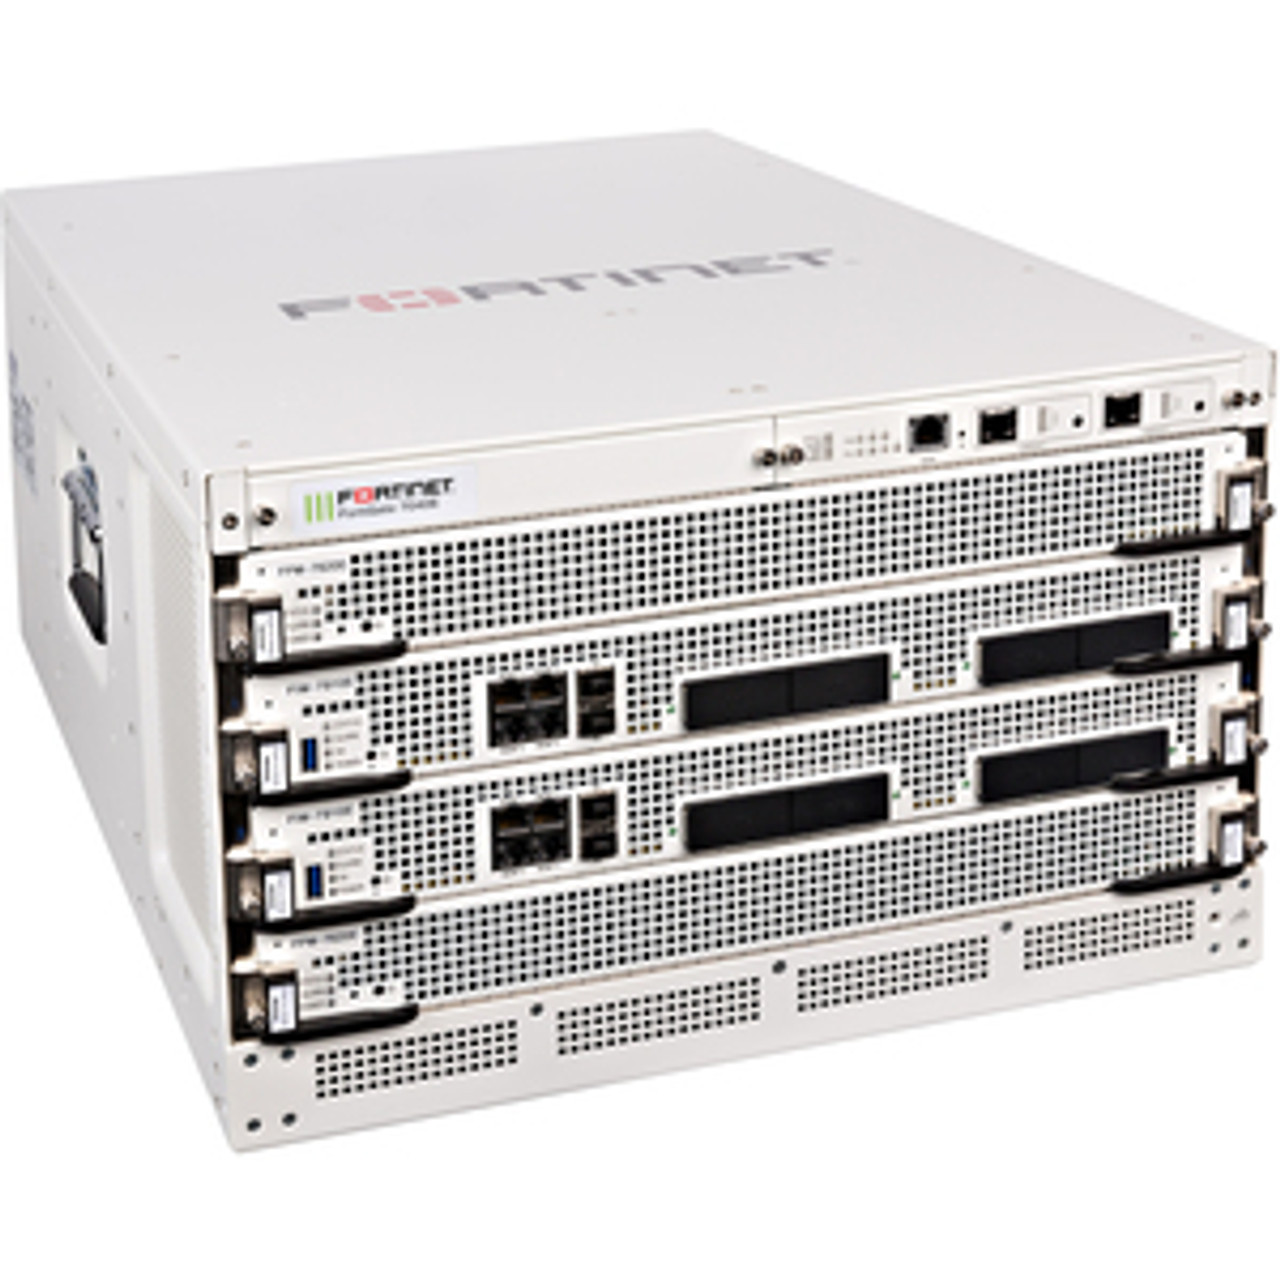 Fortinet FortiGate 7040E Network Security/Firewall Appliance - 4 Total Expansion Slots - 6U - Rack-mountable;.